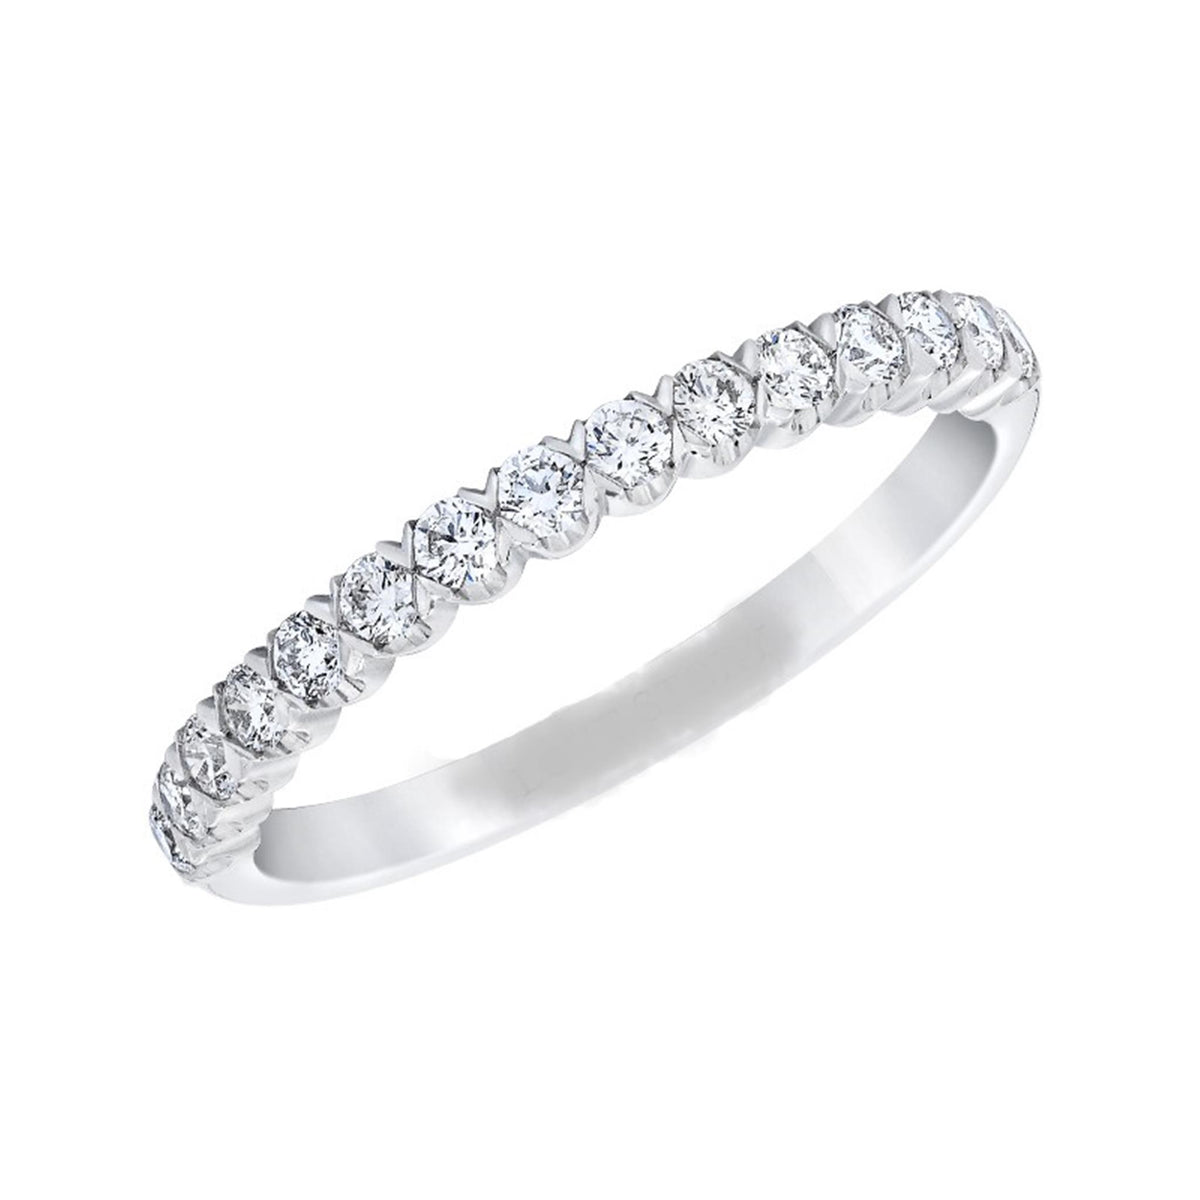 14Kt White Gold Prong Set Wedding Ring With 0.22cttw Natural Diamonds